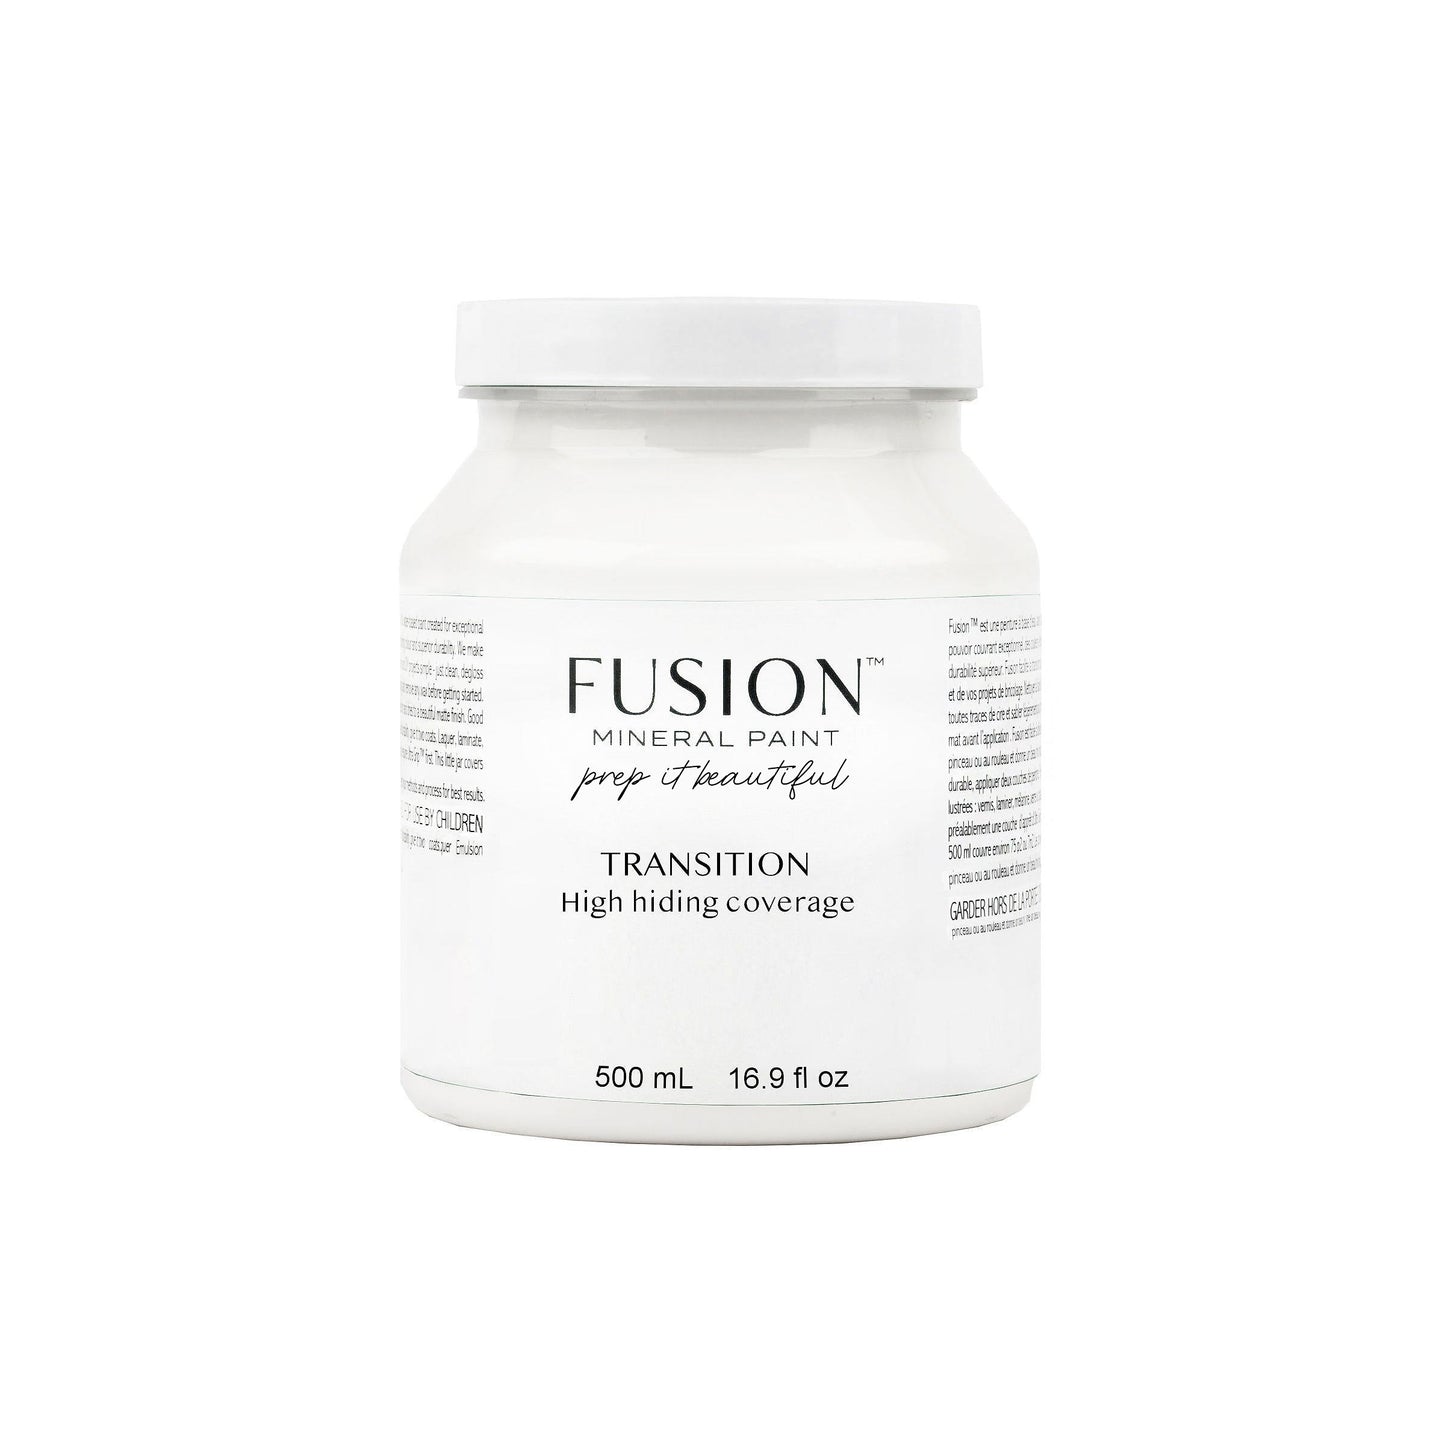 FUSION MINERAL PAINT- TRANSITION